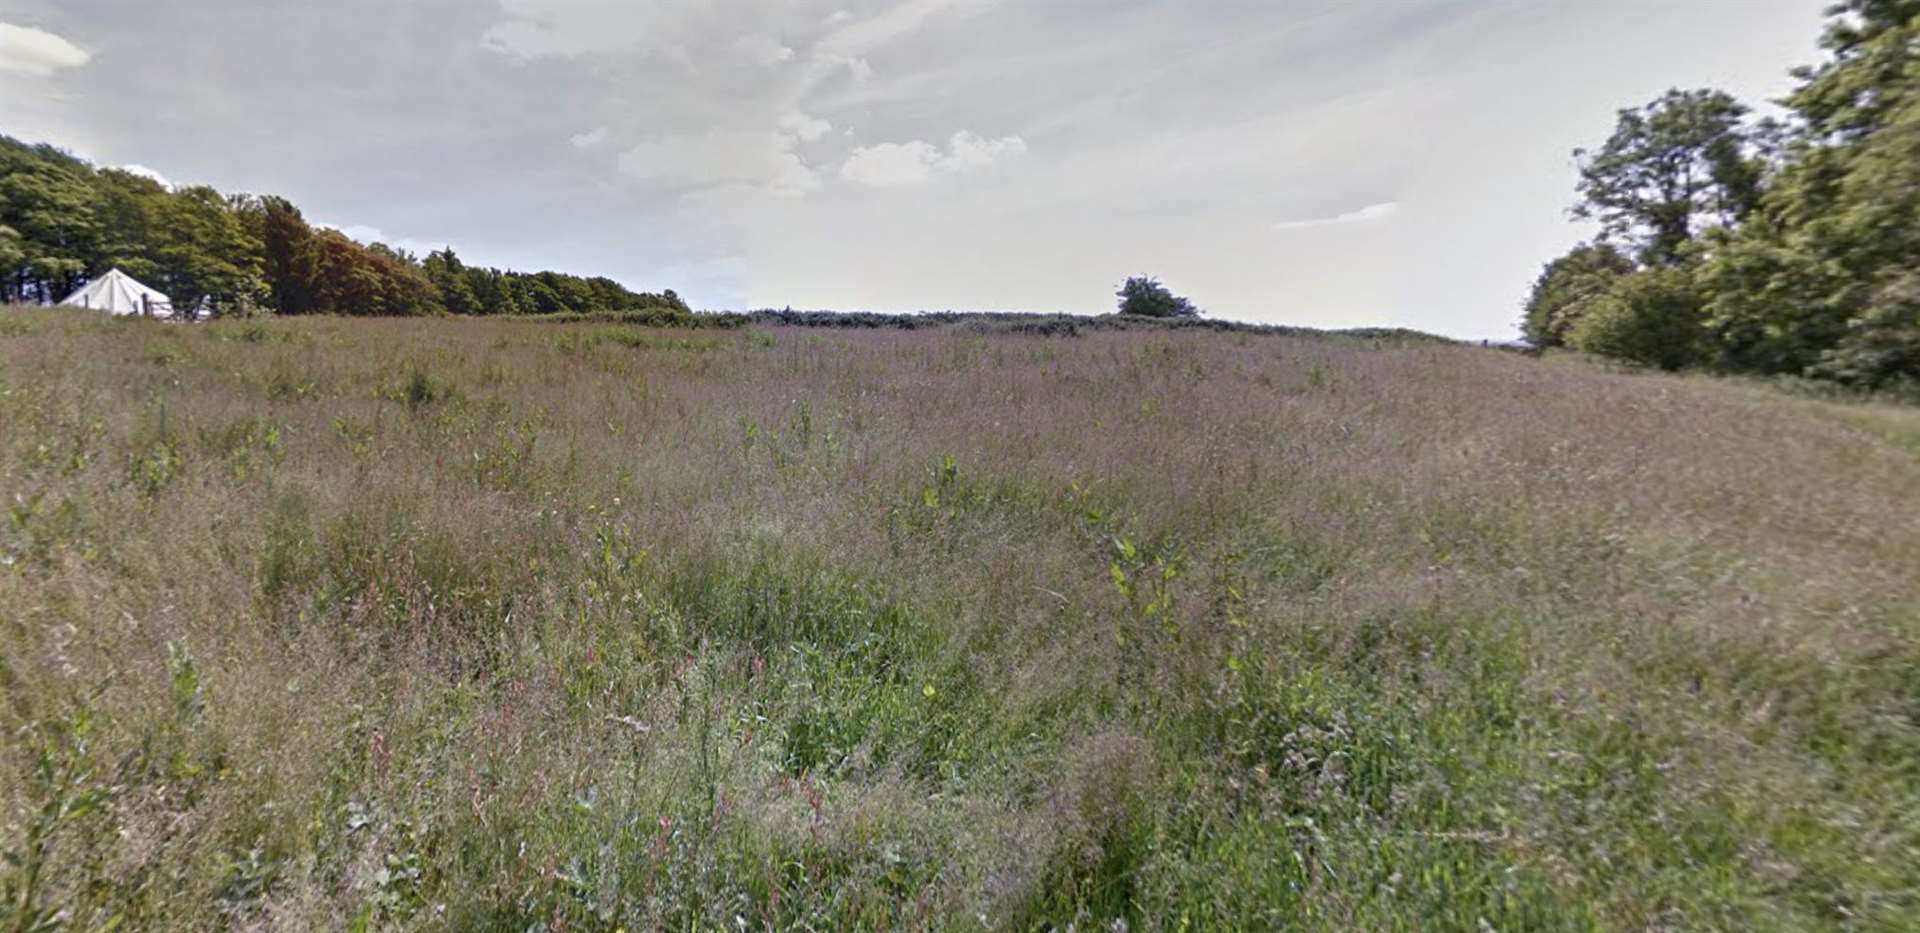 Lucinda may be hiding in the long grass. Picture: Google